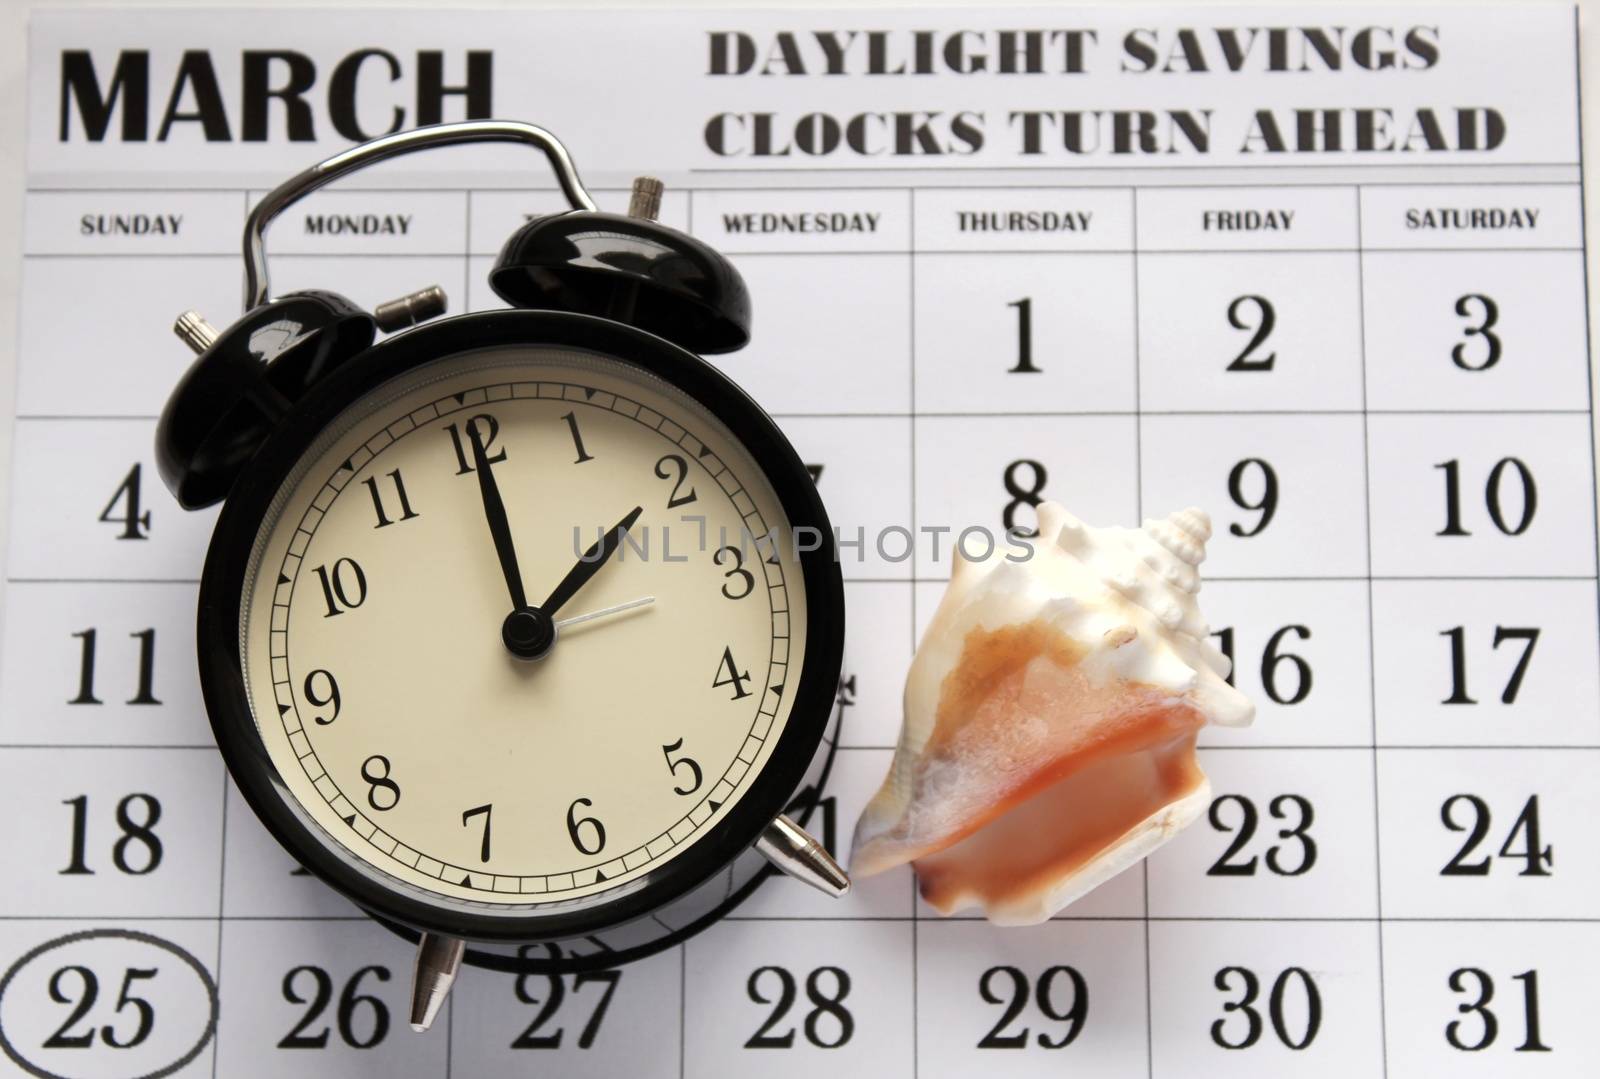 Daylight Savings Spring Forward sunday at 2:00 a.m. March 25 date indicated in the calendar. Clock next to a conch